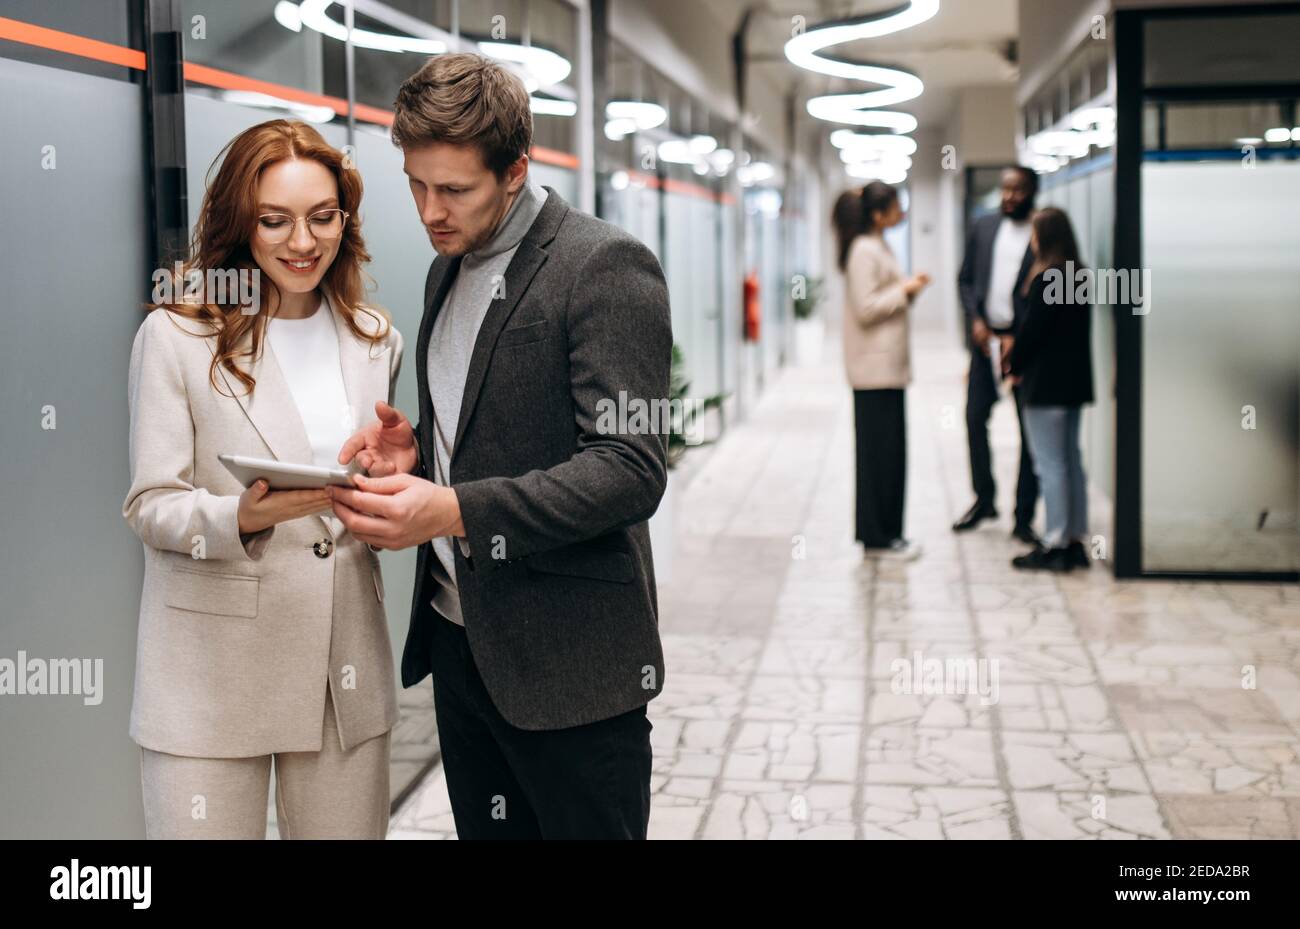 Caucasian business partners at the workplace. Friendly colleagues cooperate to develop a startup or project together. Handsome man ask for advice from beautiful smiling woman, collaboration concept Stock Photo